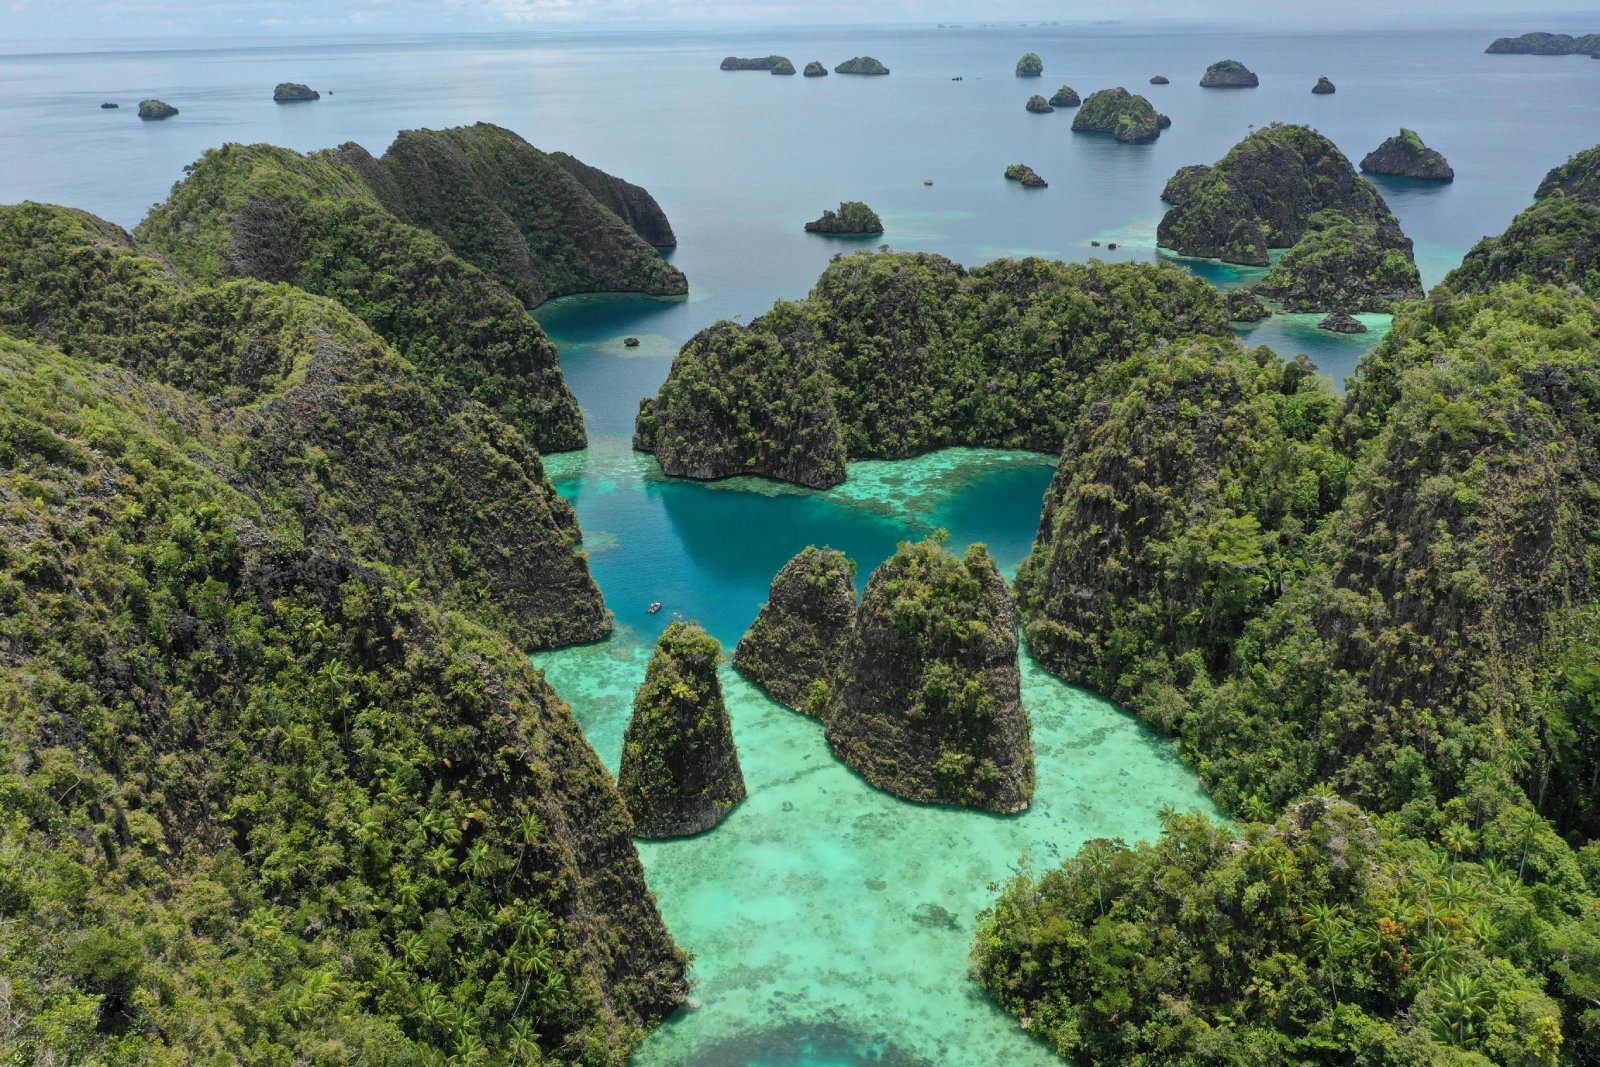 <p class="wp-caption-text">Image Credit: Shutterstock / Ditras Family</p>  <p><span>Raja Ampat, located off the northwest tip of Bird’s Head Peninsula in West Papua, Indonesia, is considered one of Earth’s most biodiverse marine habitats. The archipelago’s clear, warm waters are home to over 1,000 species of coral-inhabiting fish, 700 species of mollusk, and more than 500 types of coral. The shallow reefs offer easy access for snorkelers, providing up-close encounters with the vibrant underwater life.</span></p> <p><b>Insider’s Tip: </b><span>Stay at an eco-resort to support sustainable tourism practices and gain access to exclusive snorkeling sites.</span></p> <p><b>When to Travel: </b><span>The best time to visit is from October to April when the seas are calmest, and visibility is best.</span></p> <p><b>How to Get There: </b><span>Fly to Sorong via Jakarta or Bali, then take a boat to your chosen island within the Raja Ampat archipelago.</span></p>